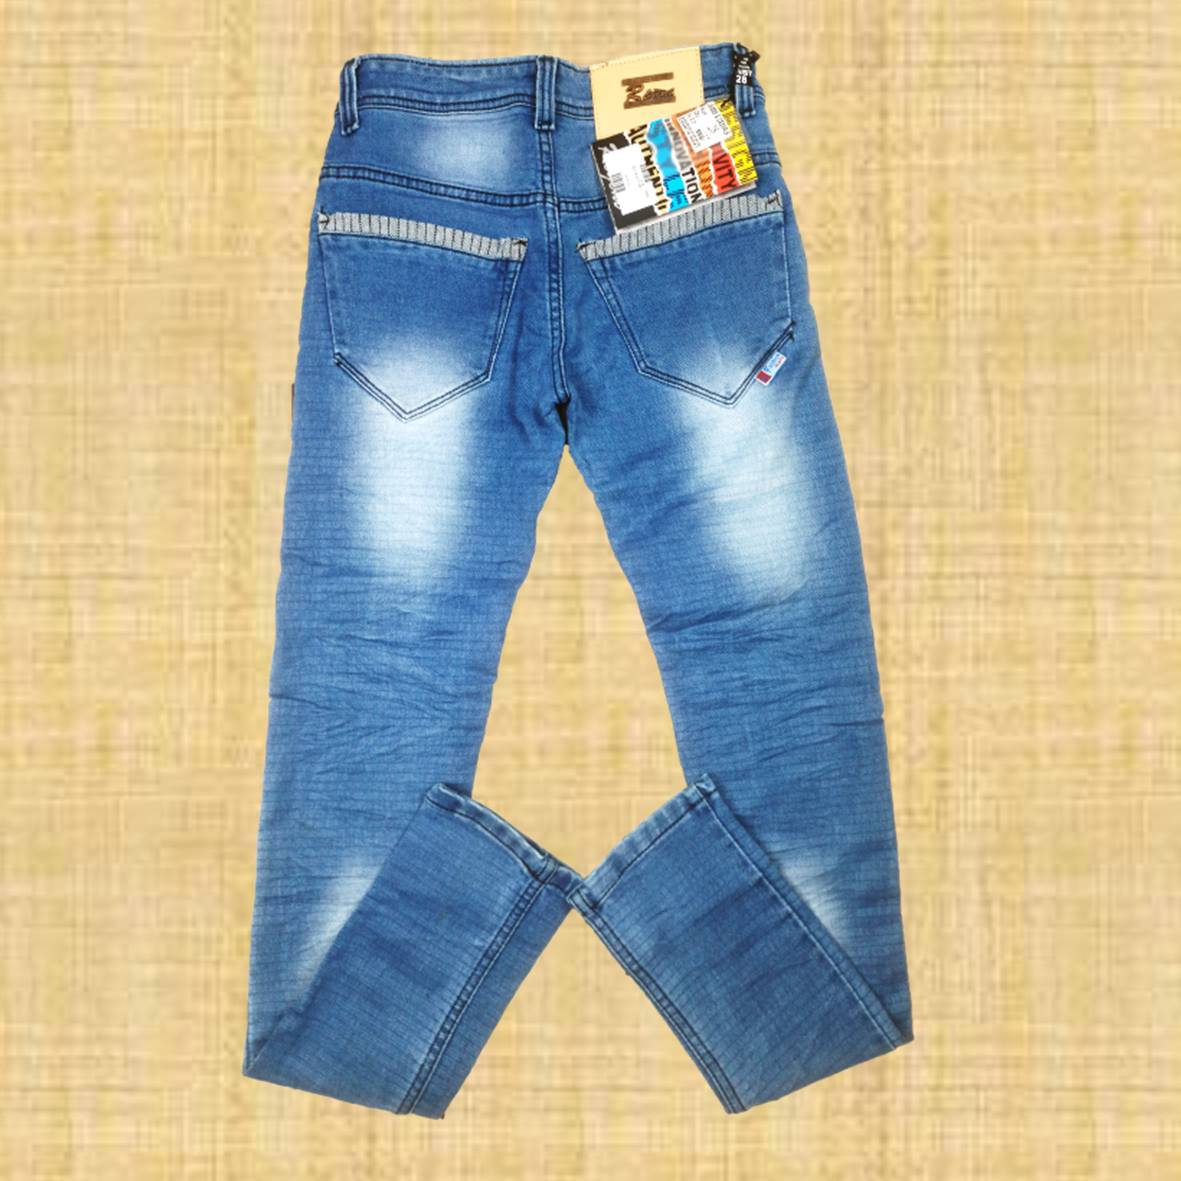 NARROW FIT JEANS FOR MEN